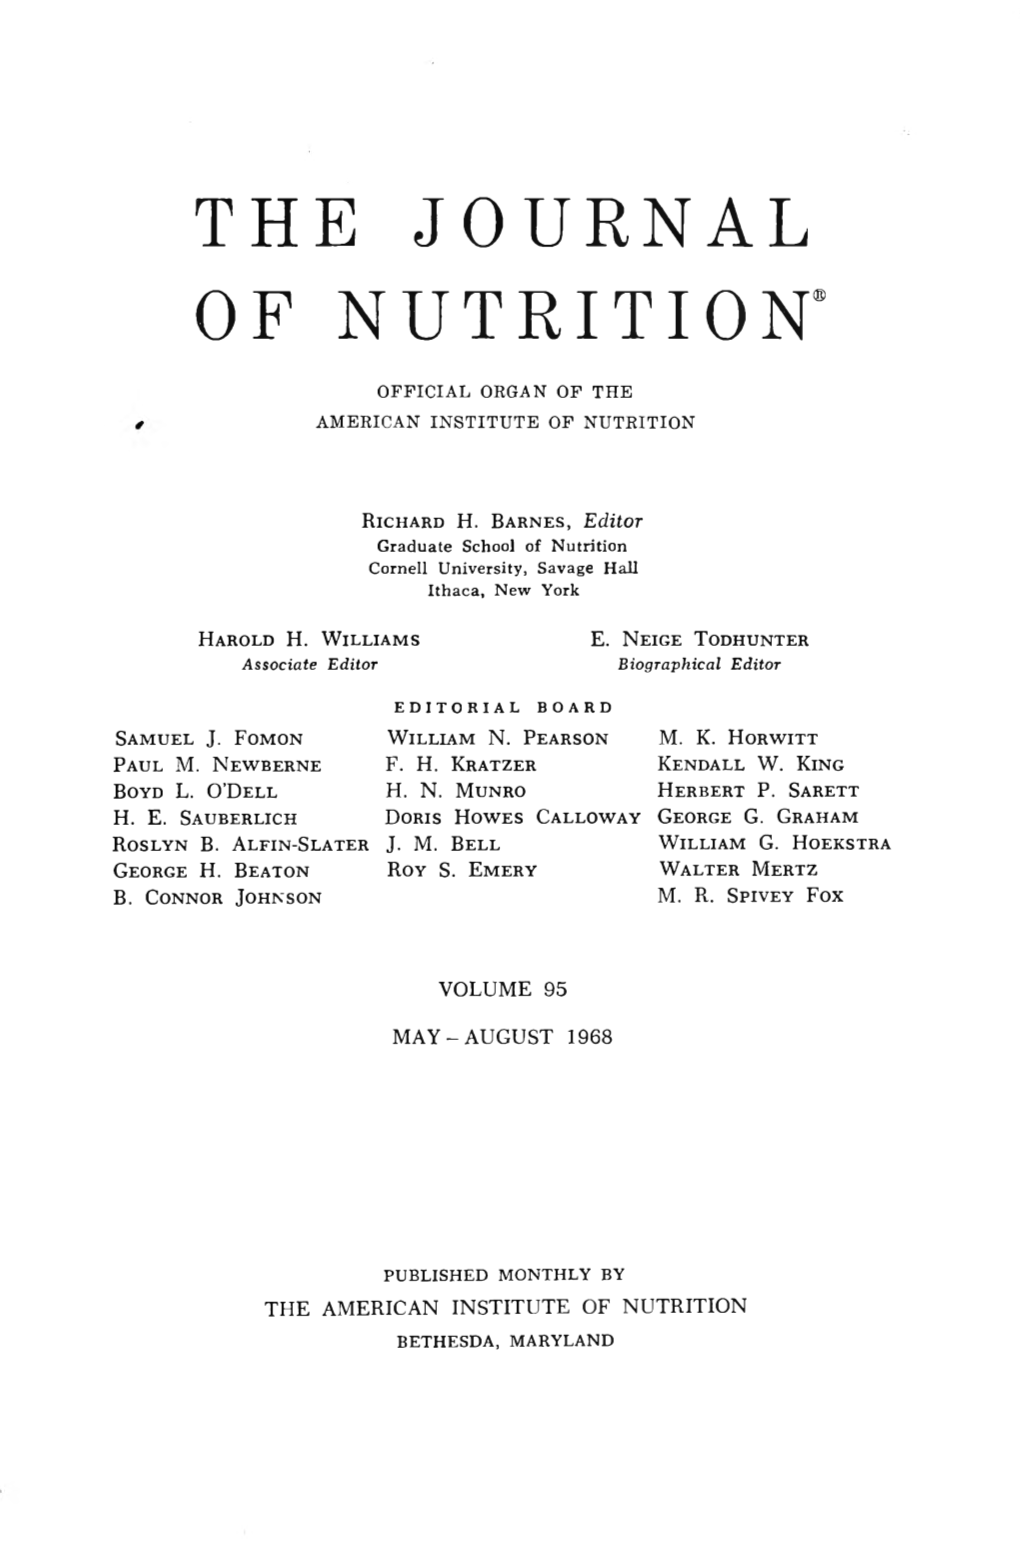 The Journal of Nutrition 1968 Volume 95 No.1